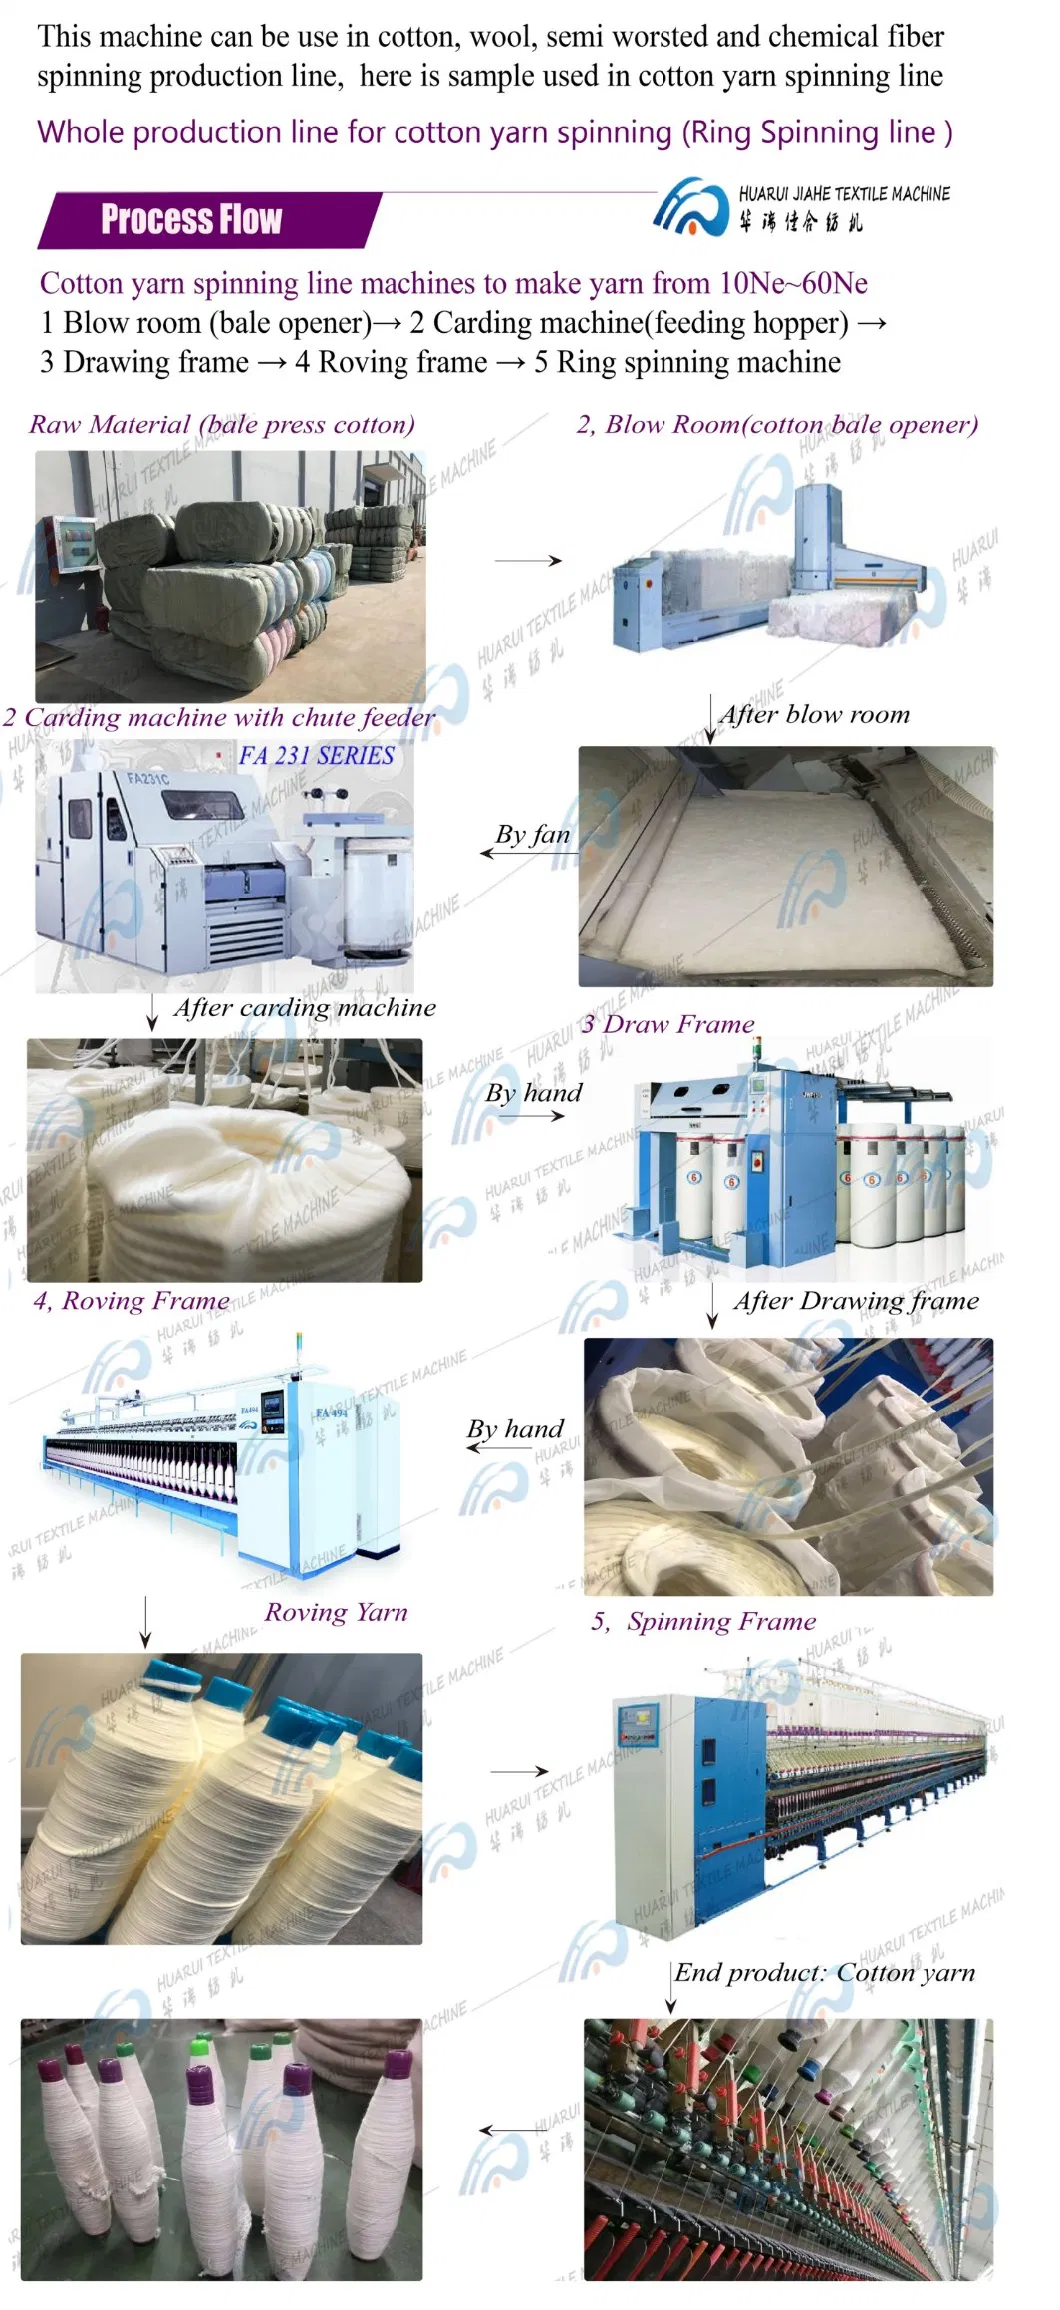 Hank Section Dyeing Machine, Colorful Section Dyeing Machine, Hank Yarn Sub-Sectional Dyeing Machine Made in China Multi Color Wool Hand Knitting Yarn Dyeing